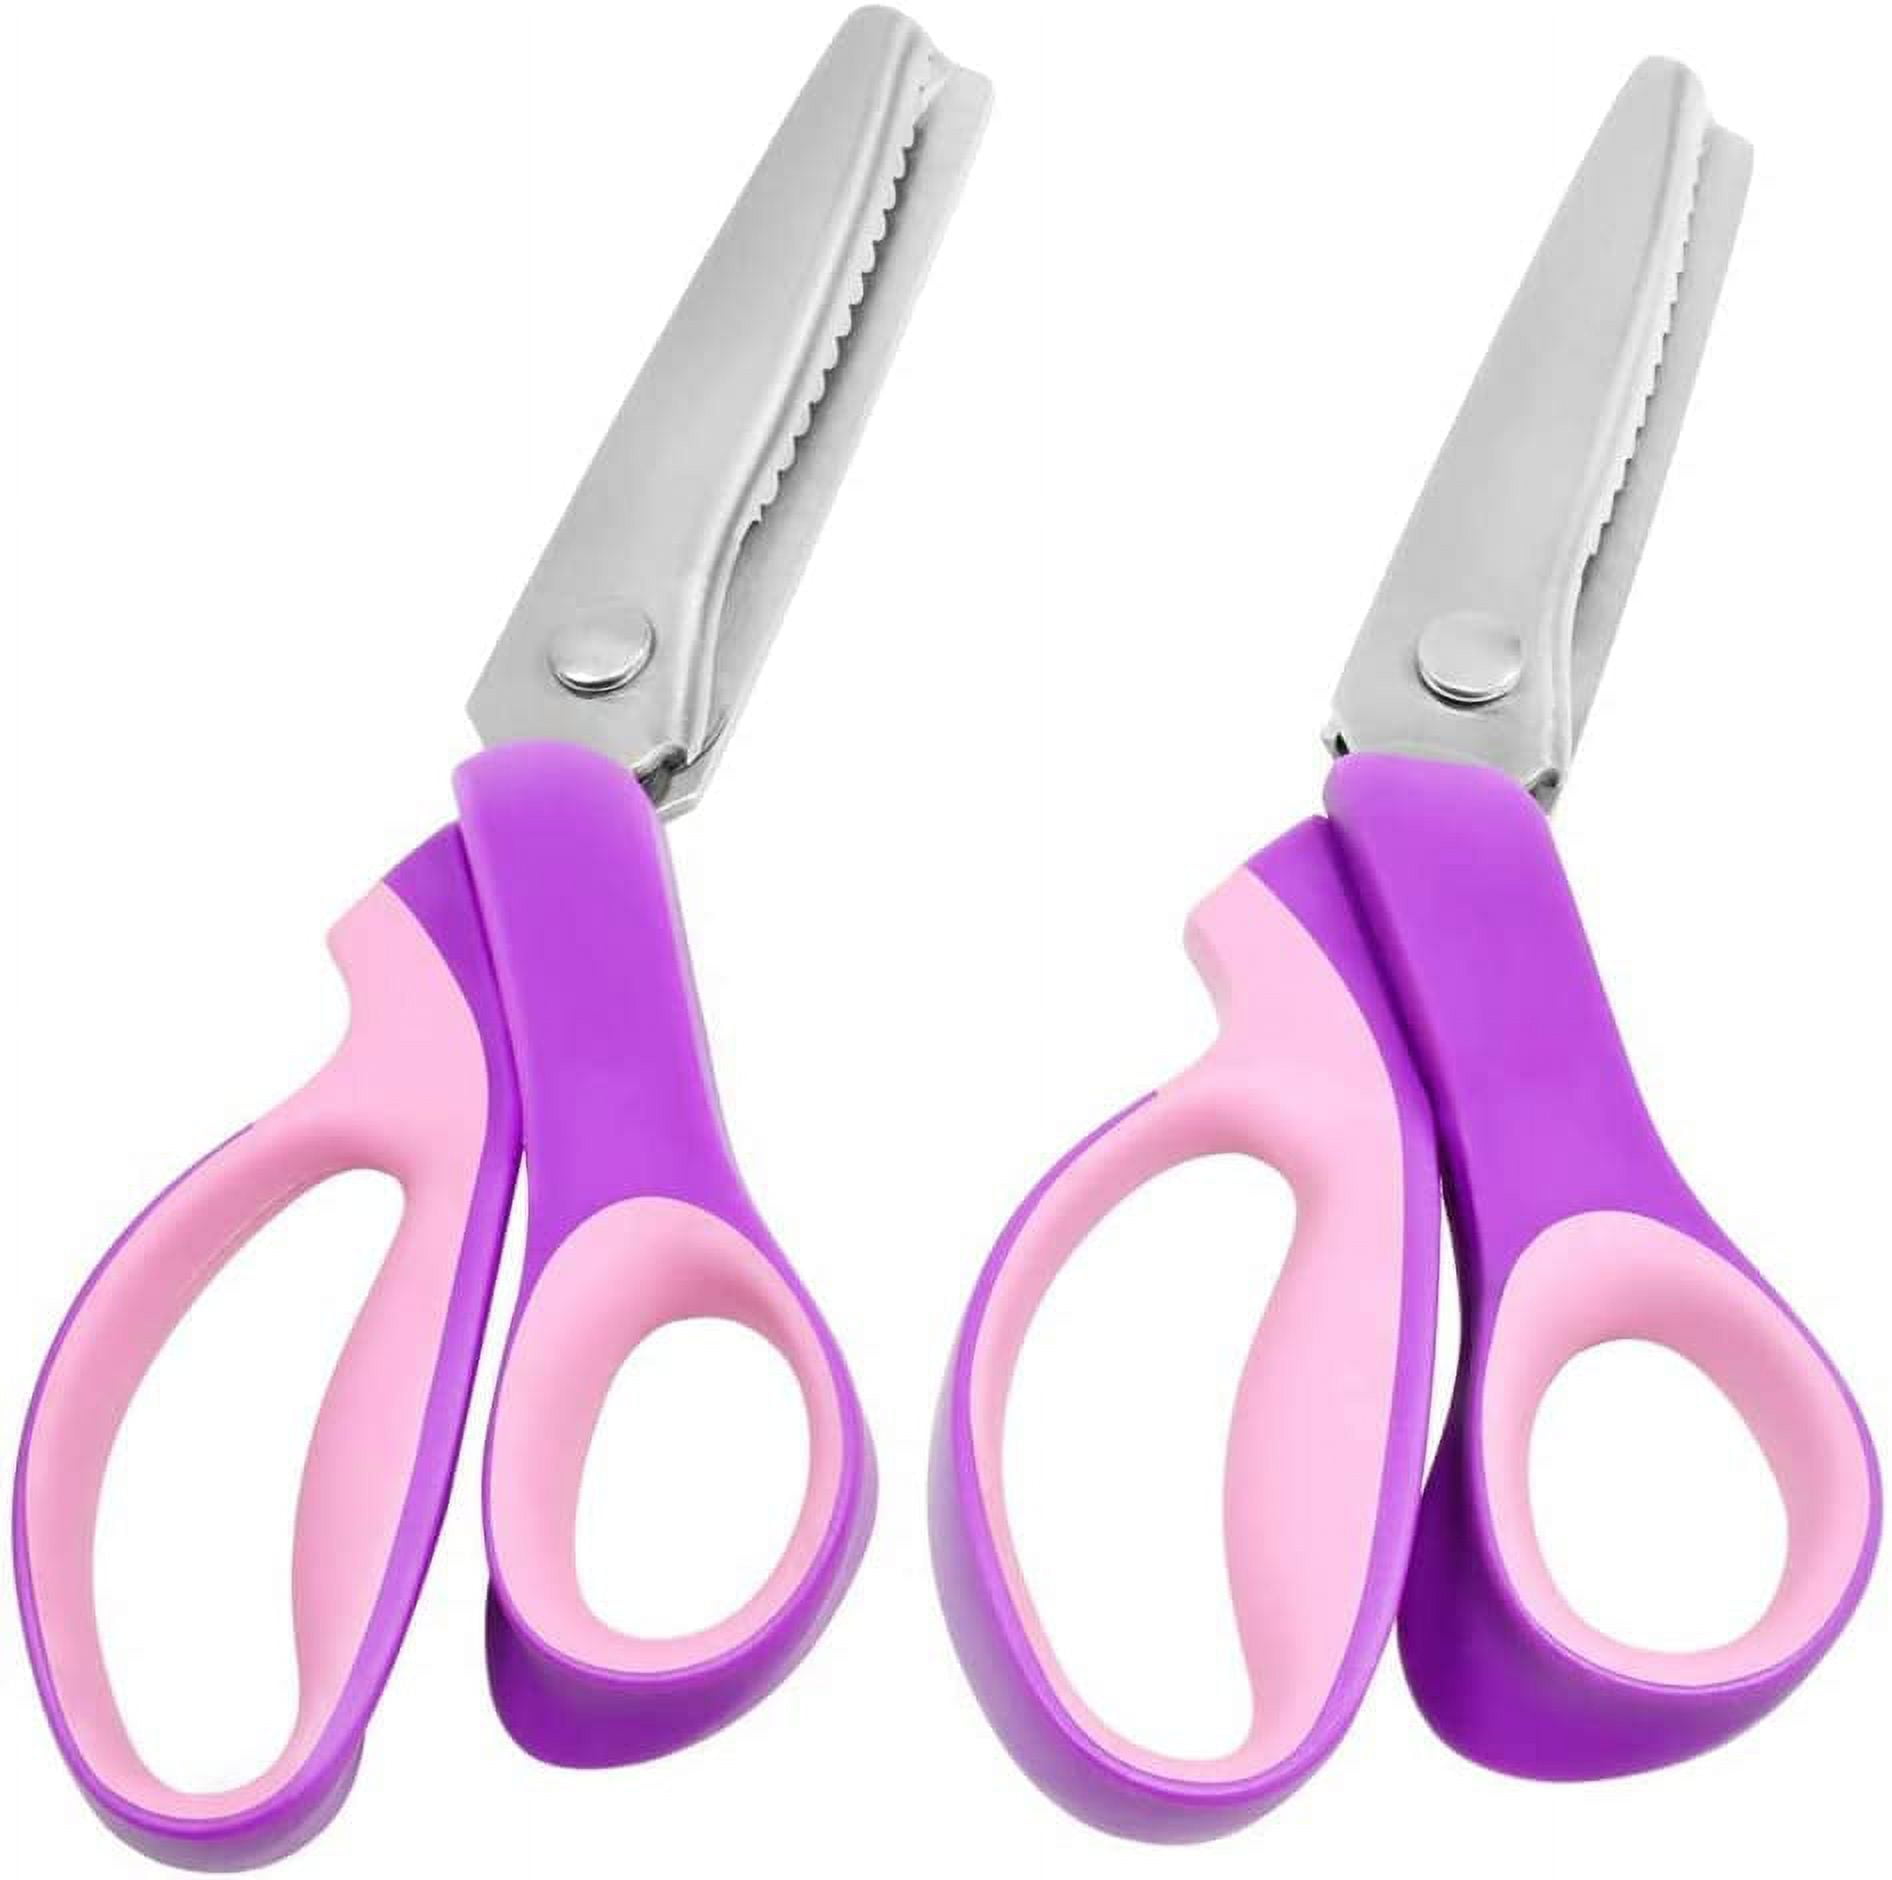 2-Piece Bundle of Zig Zag Scissors & Scalloped Pinking Shears 100% Stainless Steel Sewing Pinking Shears for Fabric Cutting, Ideal Craft Scissors